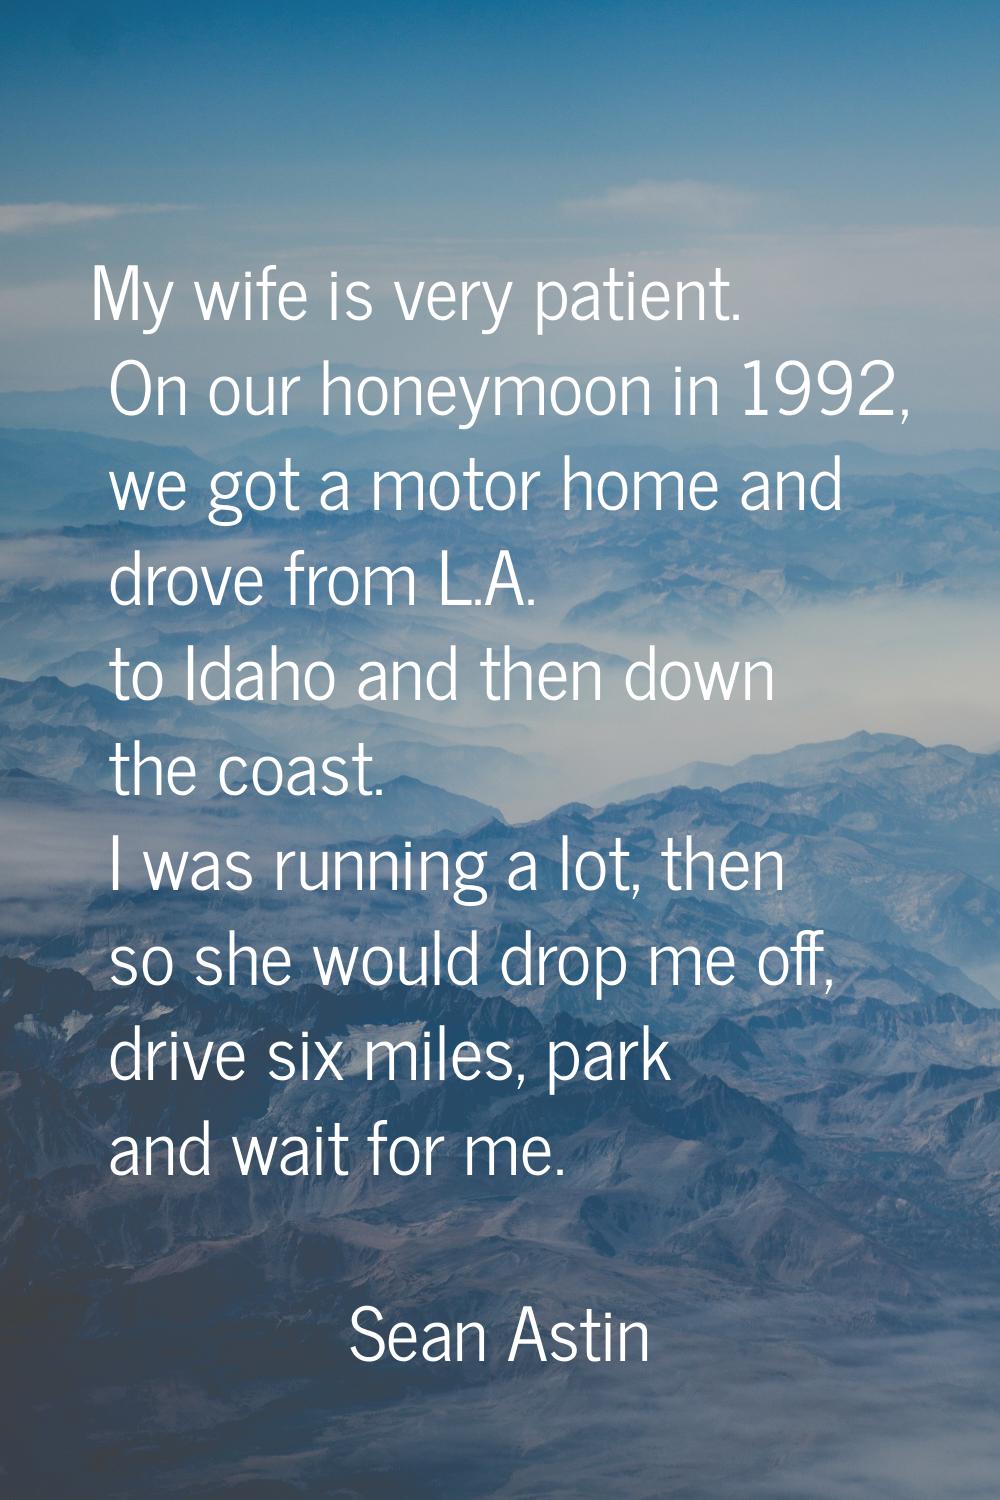 My wife is very patient. On our honeymoon in 1992, we got a motor home and drove from L.A. to Idaho